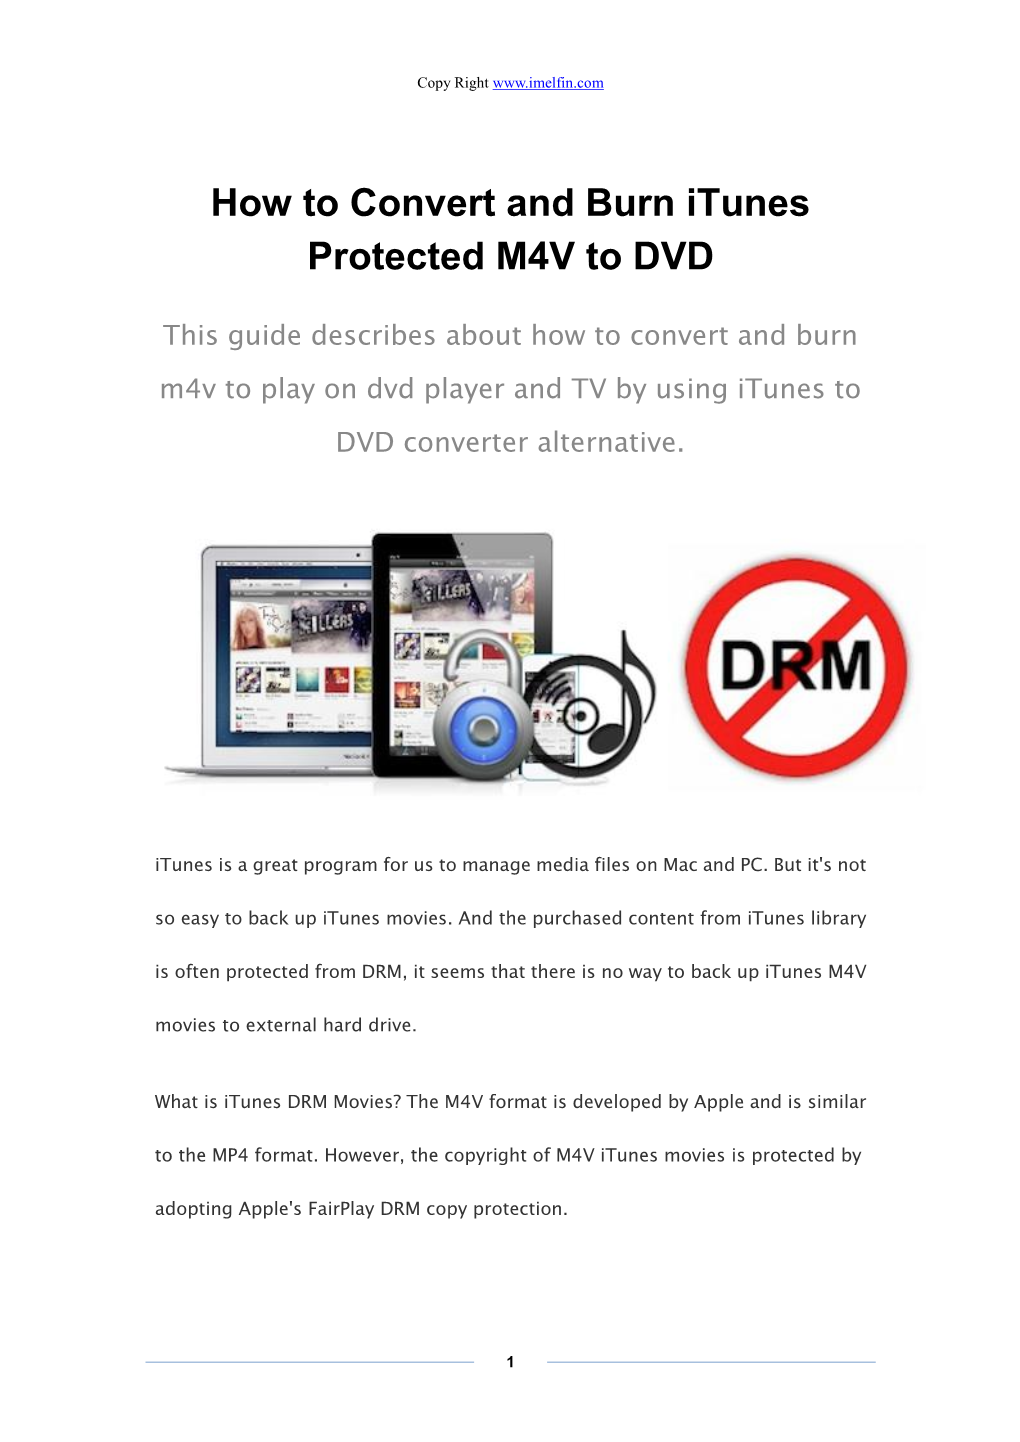 How to Convert and Burn Itunes Protected M4V to DVD